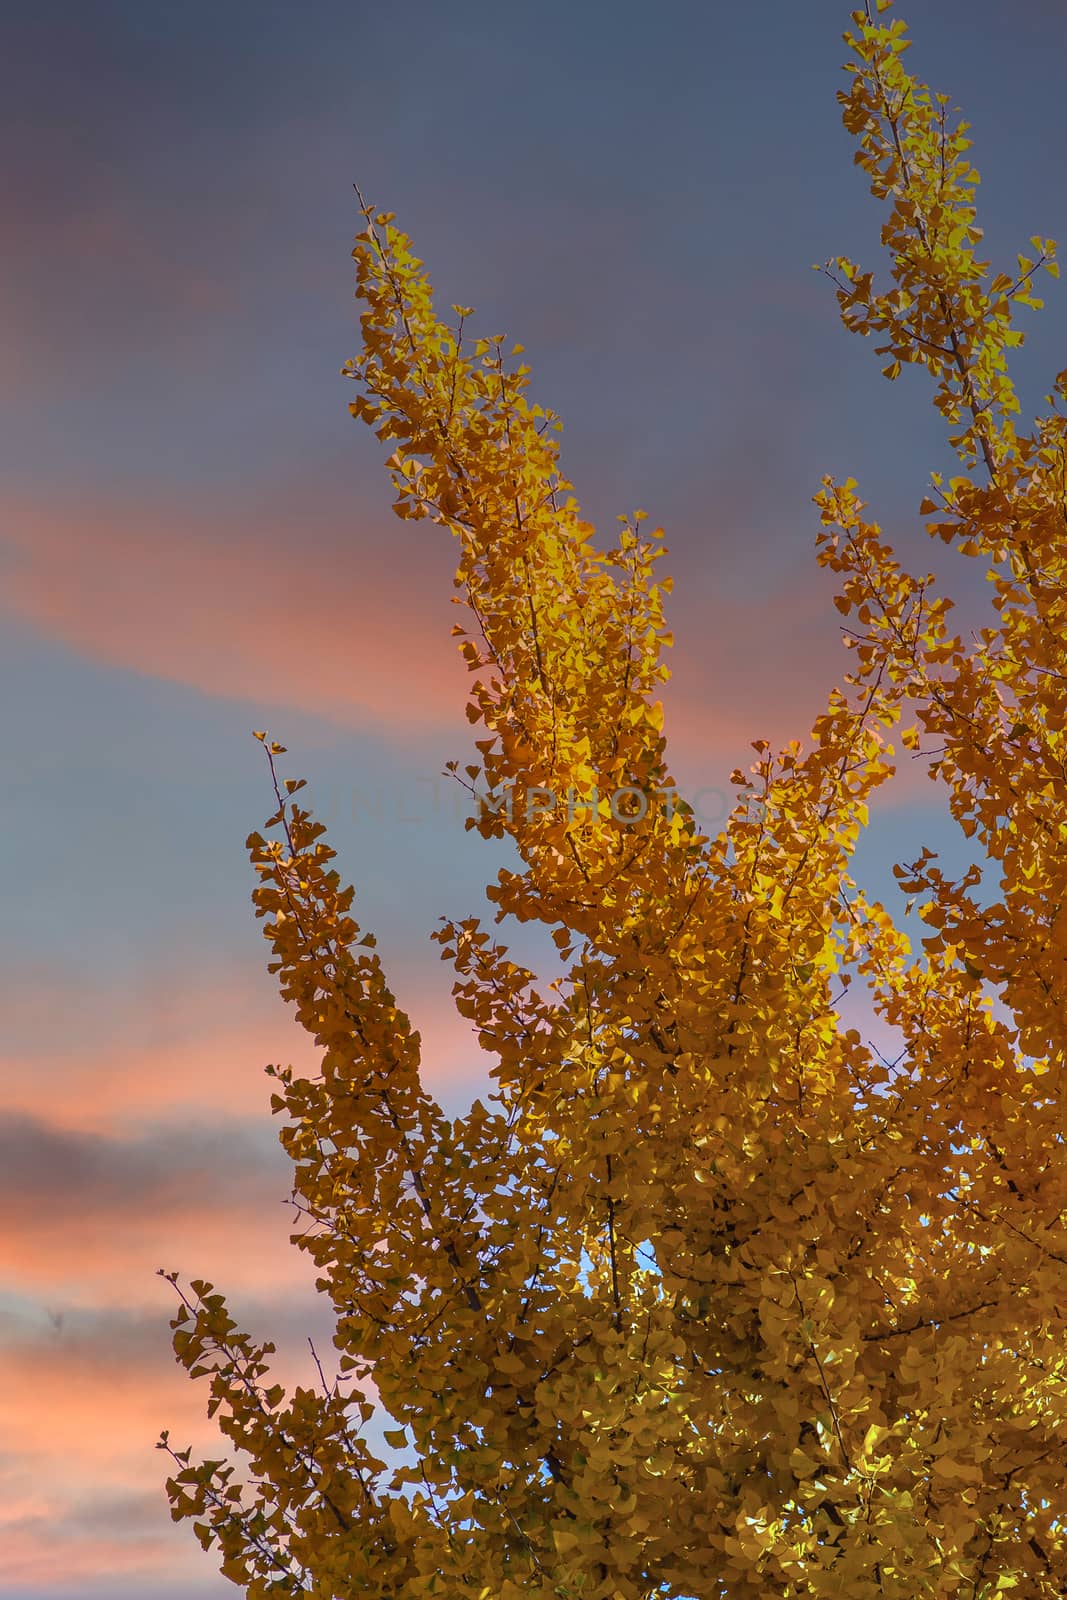 A golden linden tree with yellow leaves under blue autumn sky